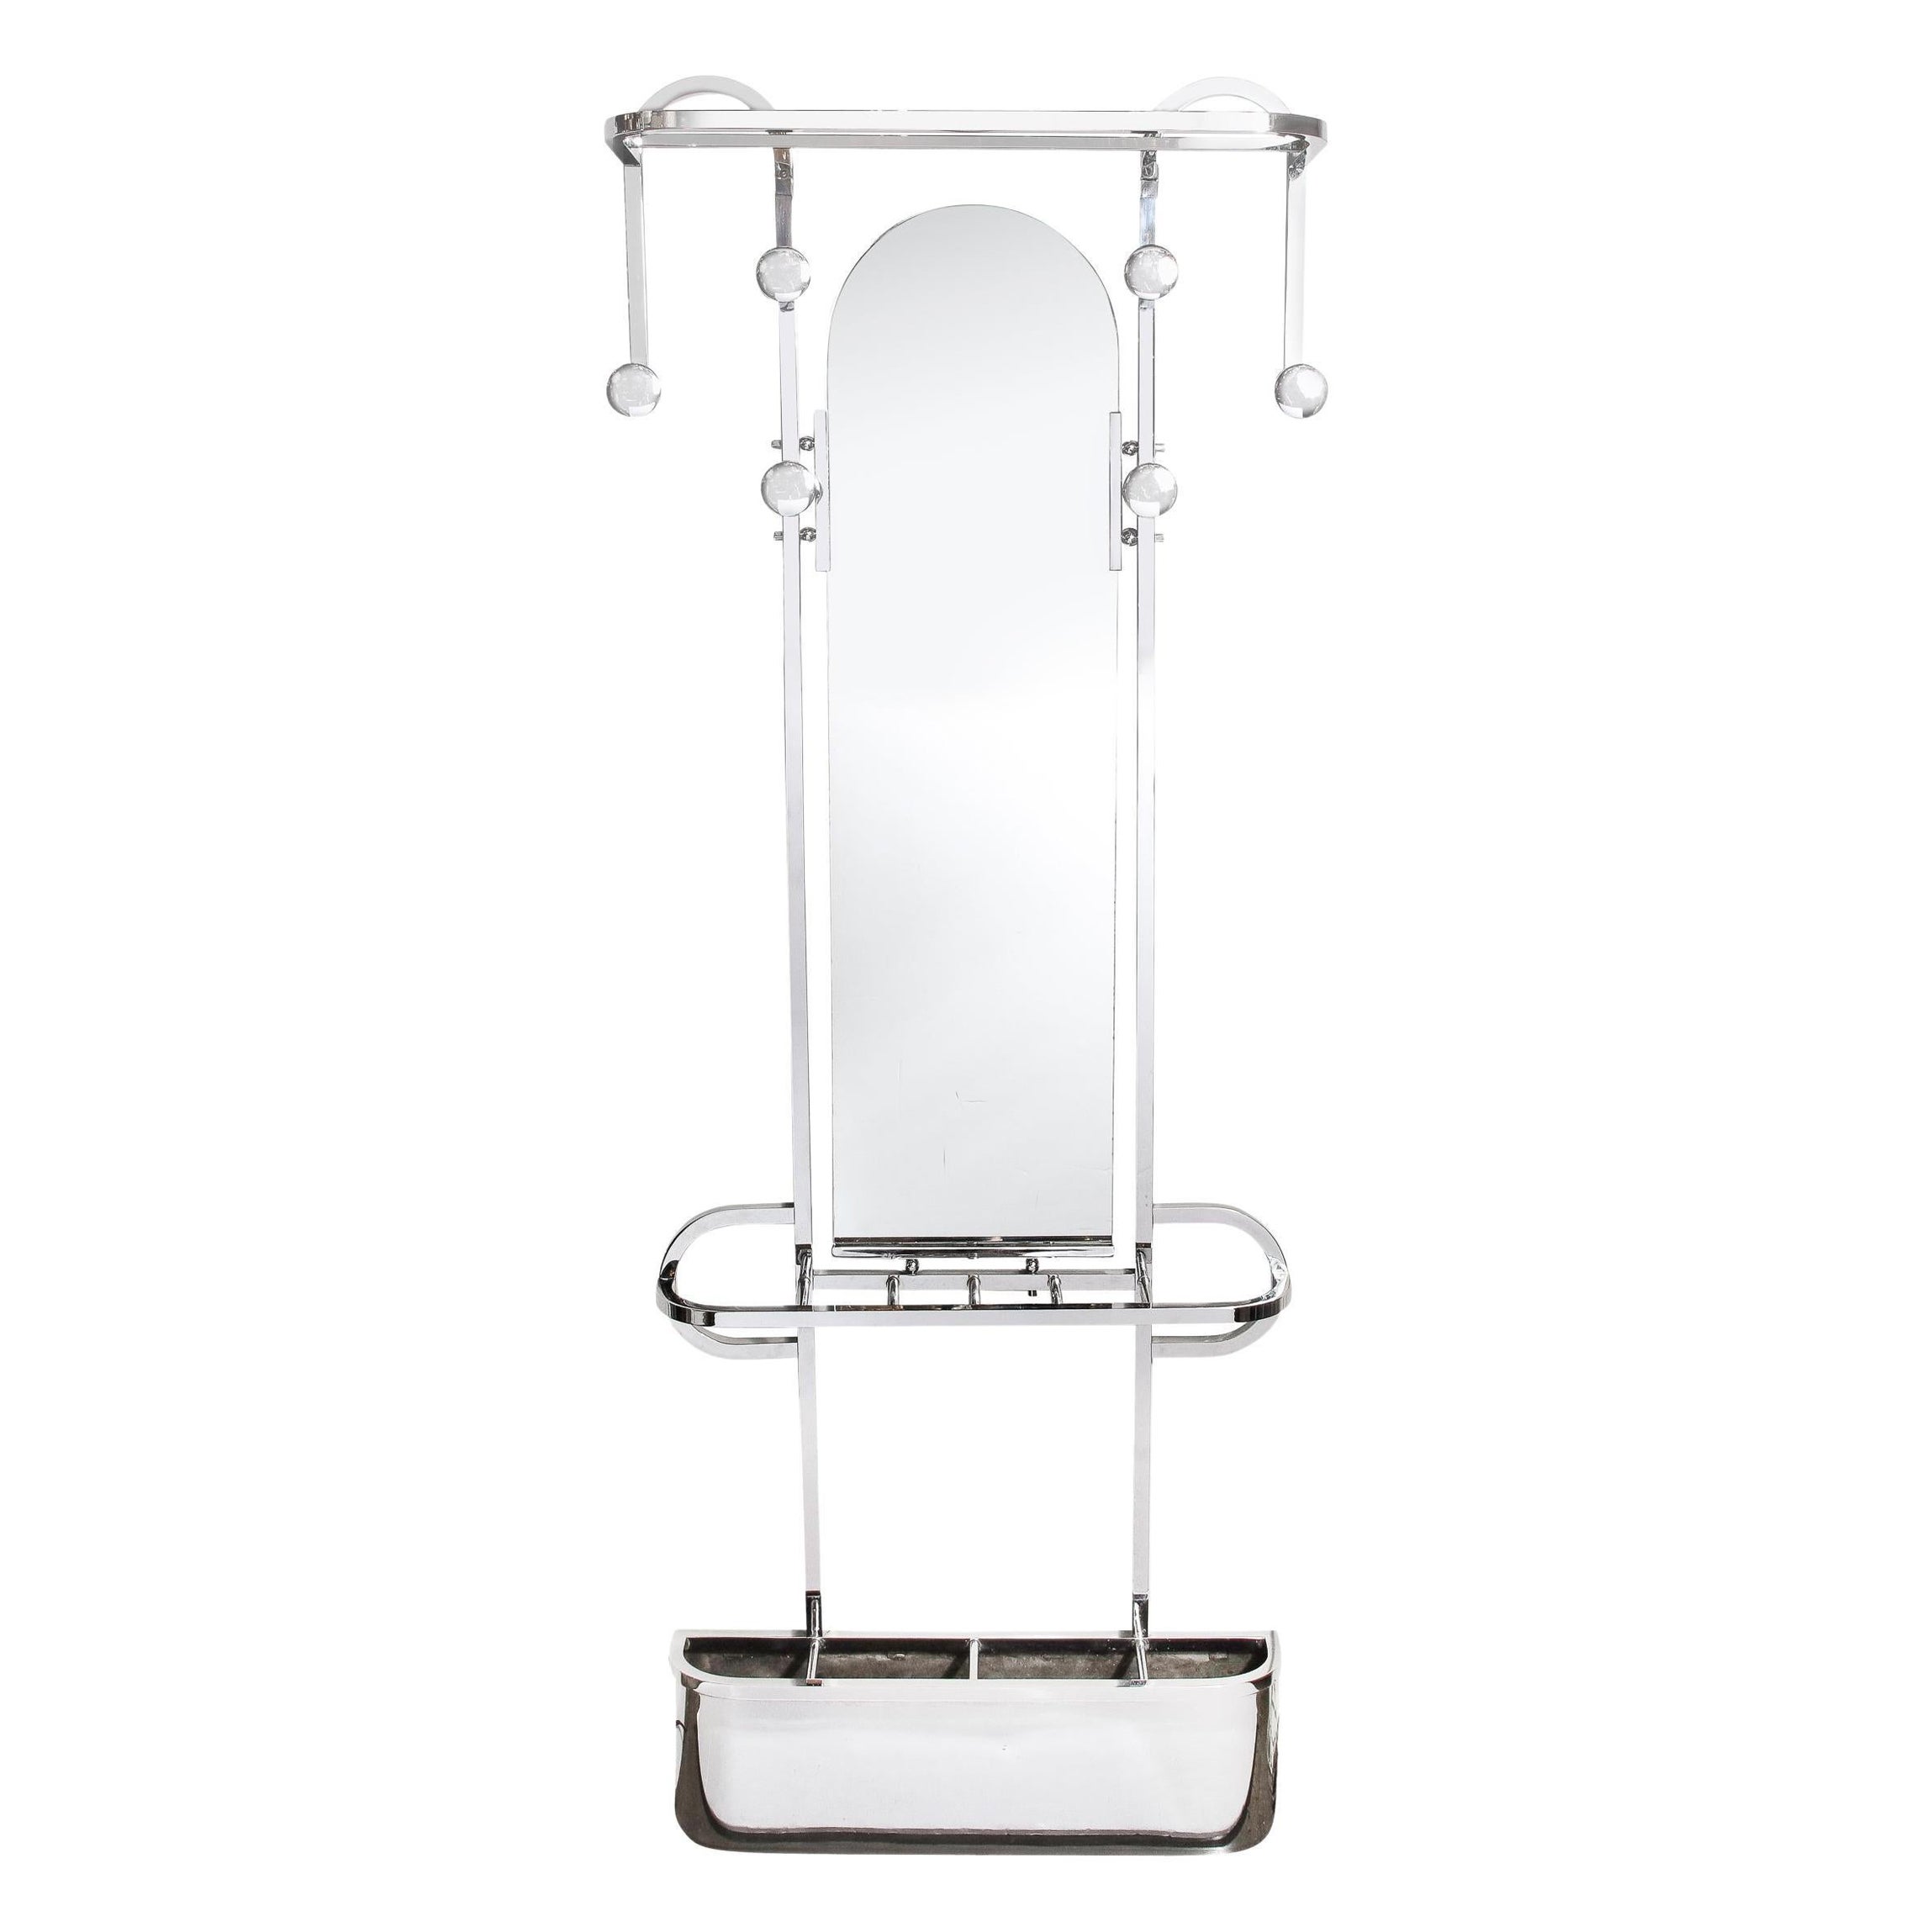 French Streamlined Art Deco Polished Chrome Coat/Umbrella Rack W/ Arched Mirror For Sale